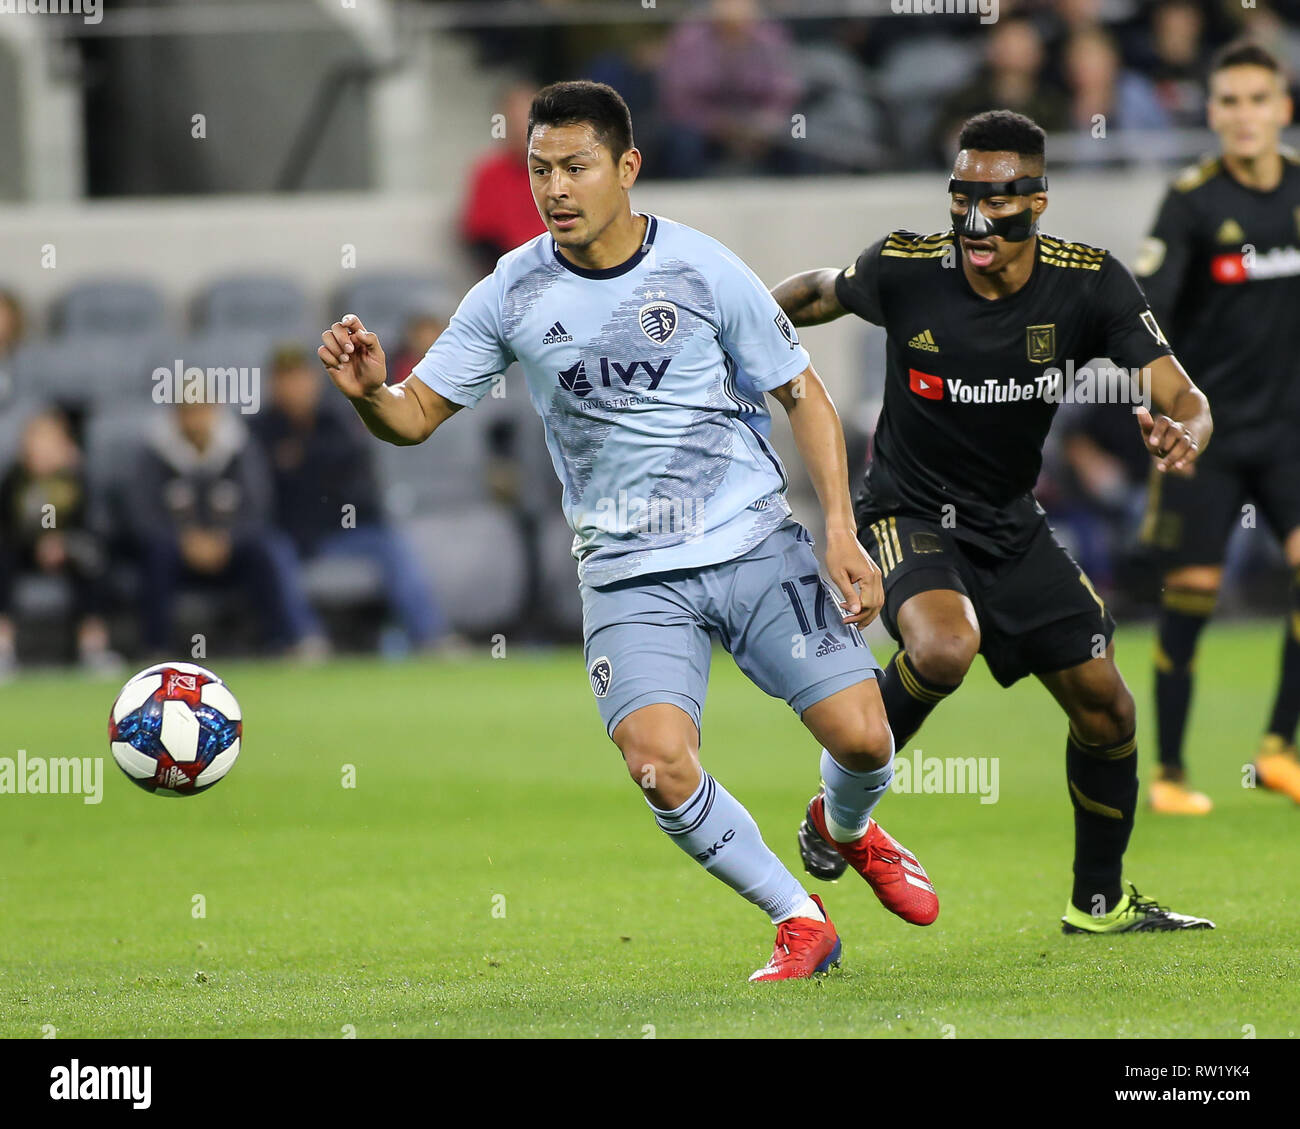 Los Angeles, CA, USA. 03rd Mar, 2019. MLS 2019: Sporting Kansas City midfielder Roger Espinoza #17 during the Los Angeles Football Club vs Sporting KC at BANC OF CALIFORNIA Stadium in Los Angeles, Ca on March 03, 2019. Photo by Jevone Moore Credit: csm/Alamy Live News Stock Photo